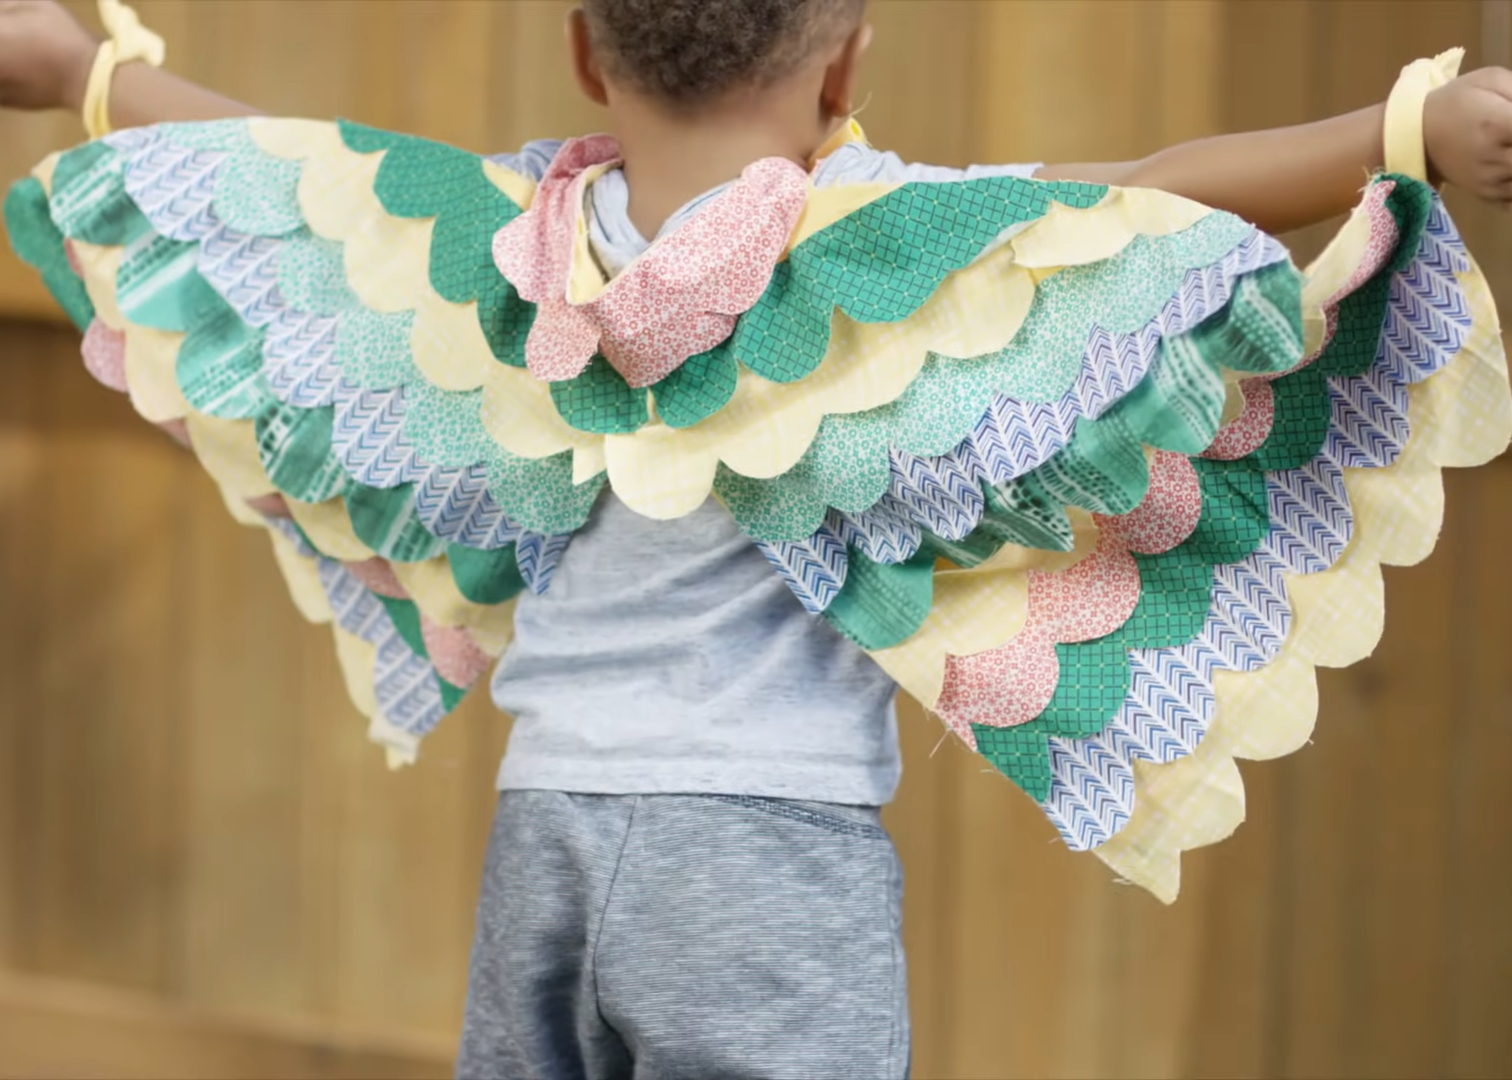 Easy No-sew DIY Halloween Costumes for Your Kids